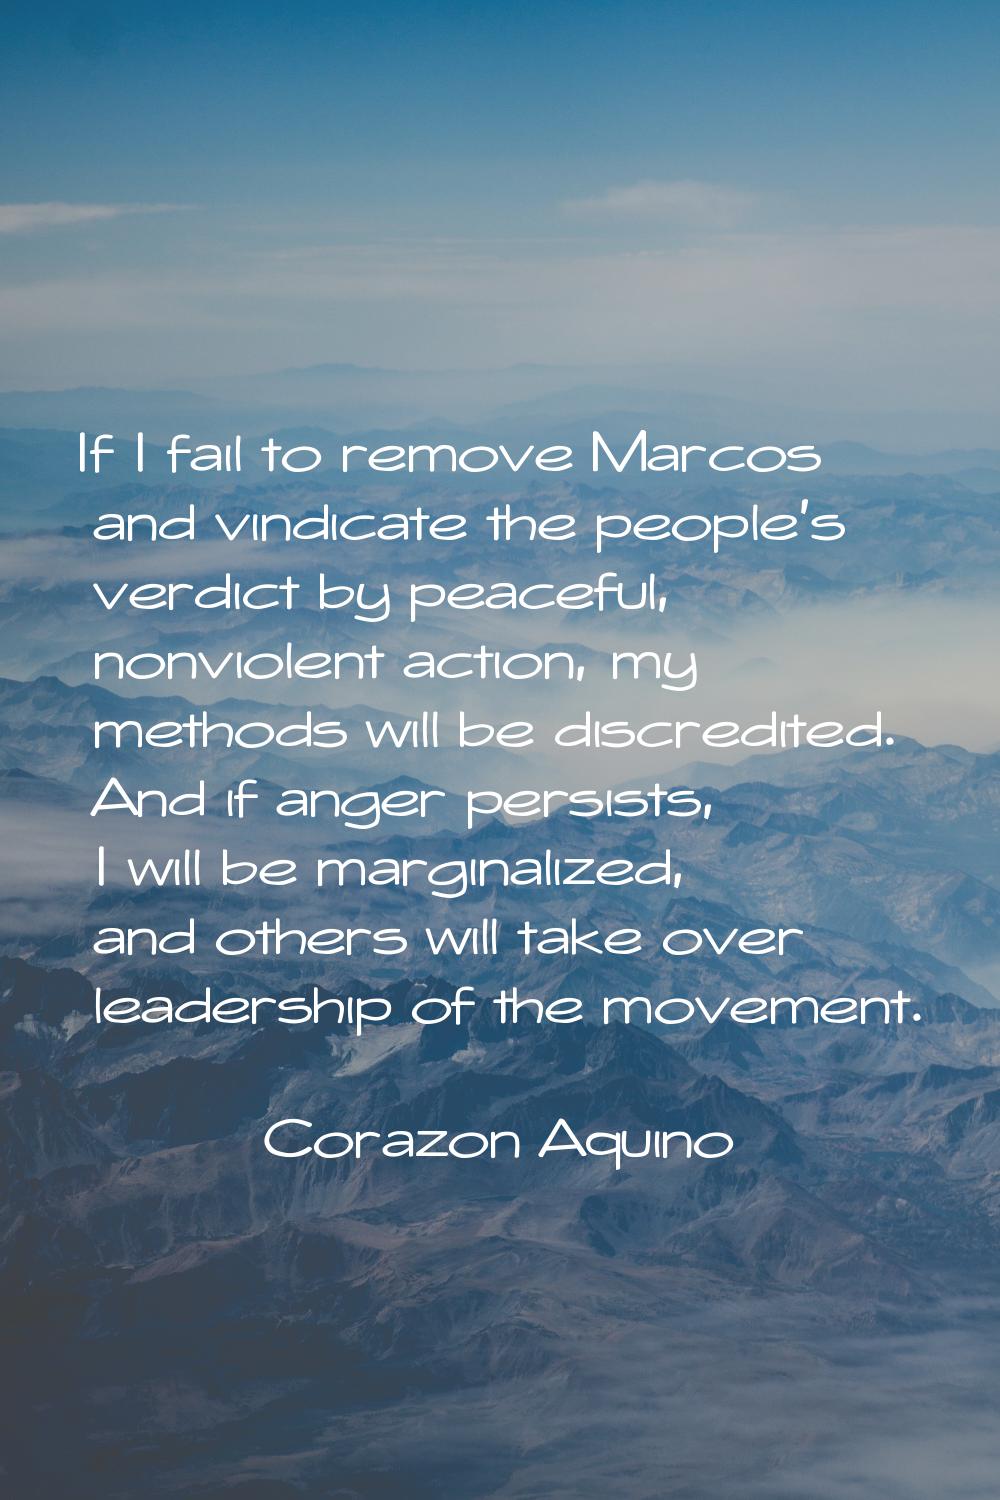 If I fail to remove Marcos and vindicate the people's verdict by peaceful, nonviolent action, my me